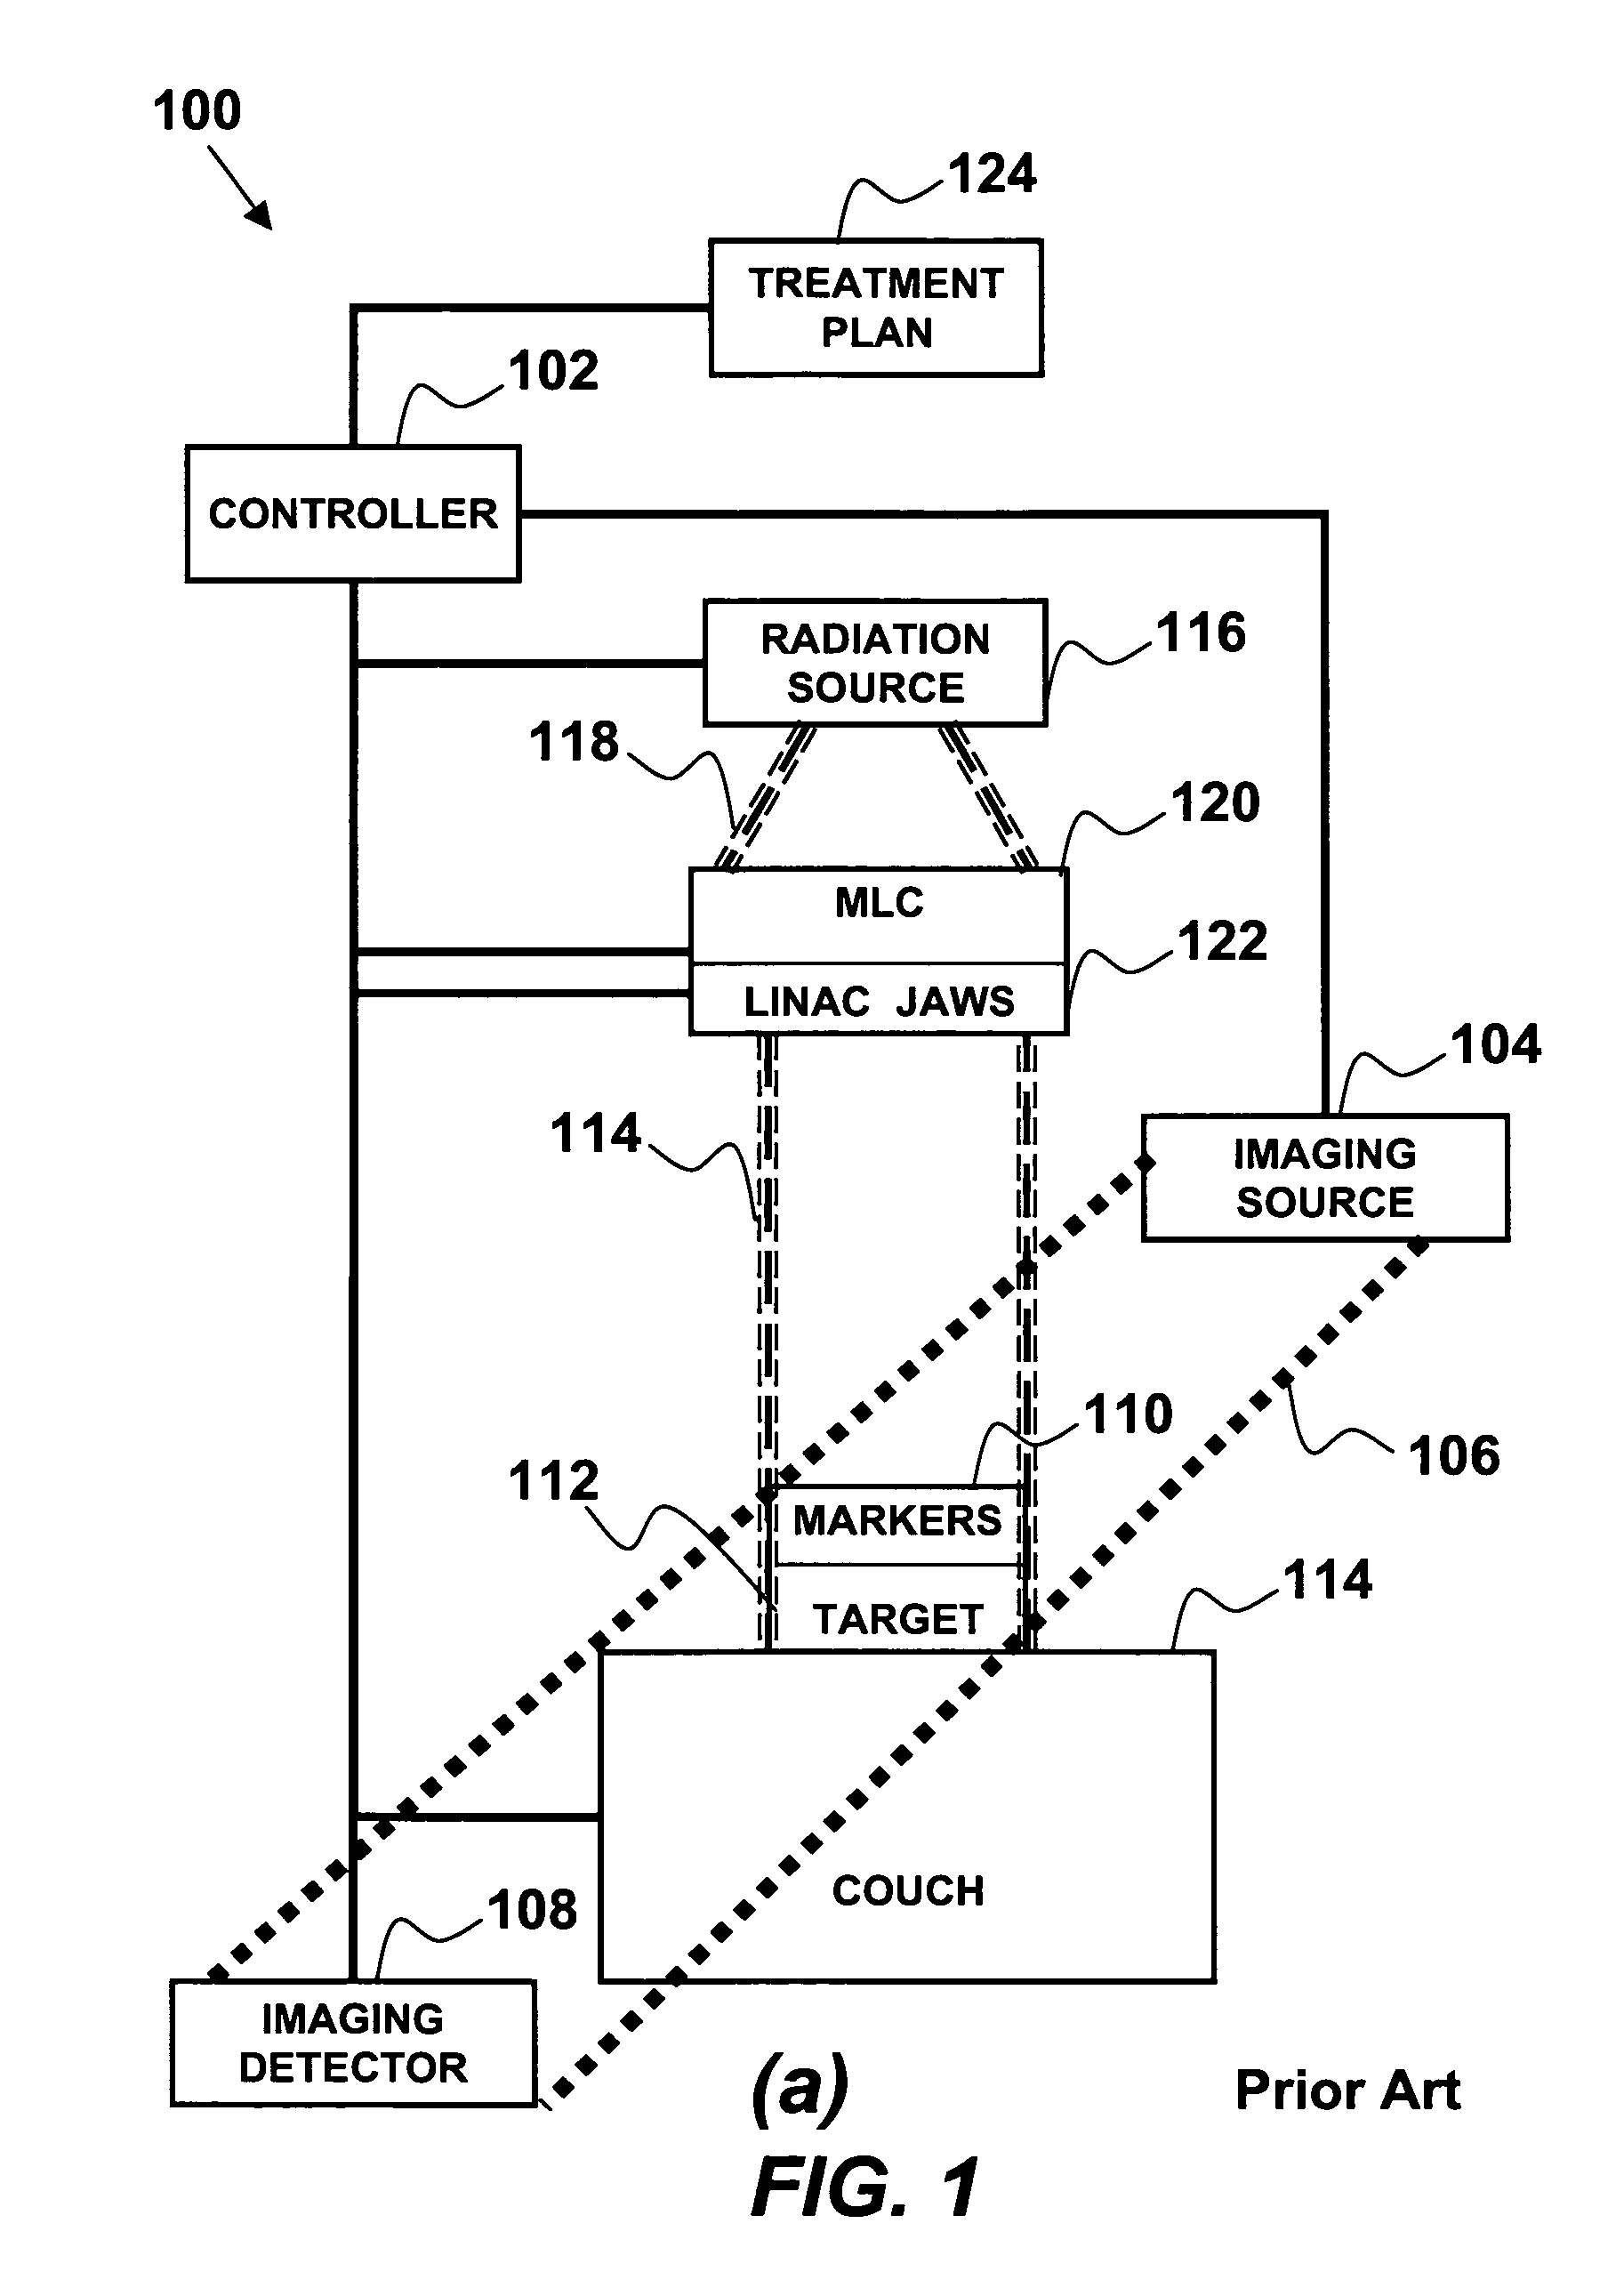 Method to track three-dimensional target motion with a dynamical multi-leaf collimator